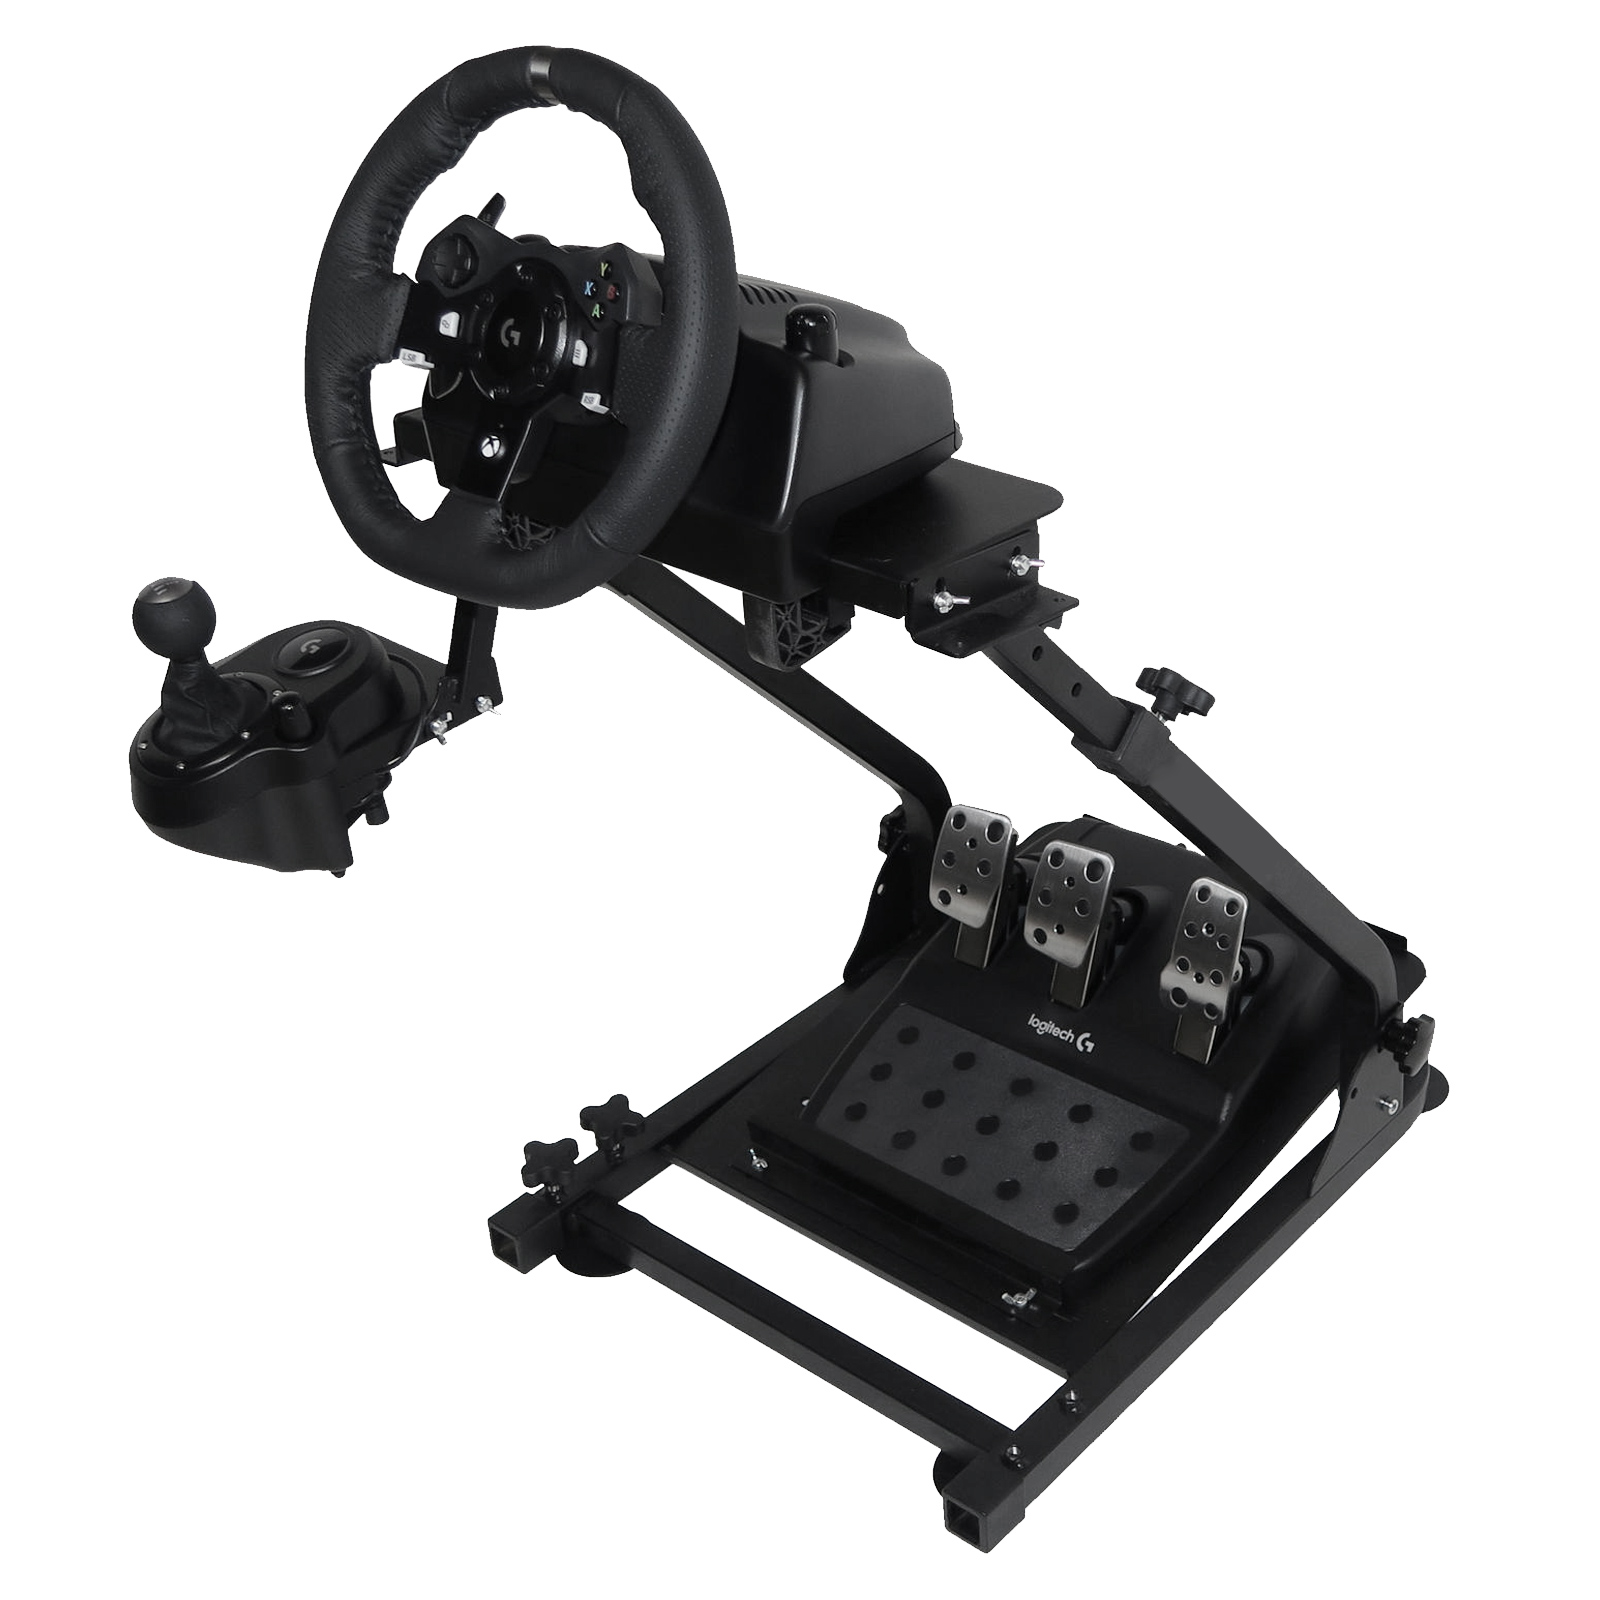 Steering Wheel stand For Thrustmaster T300RS Racing Wheel ...